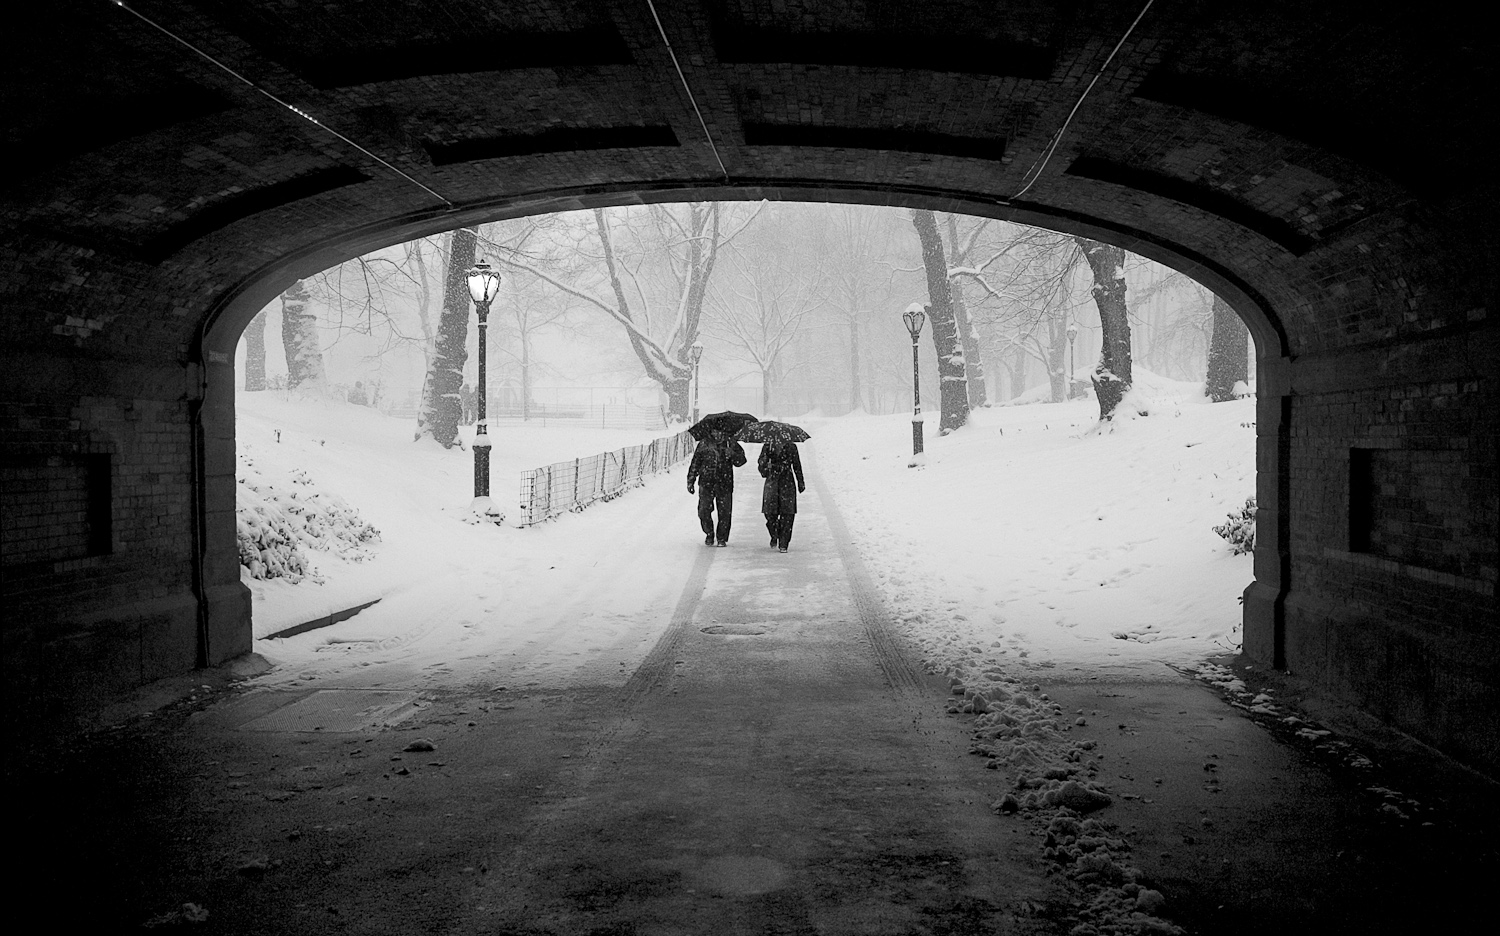 couple_in_snowstorm_large.jpg